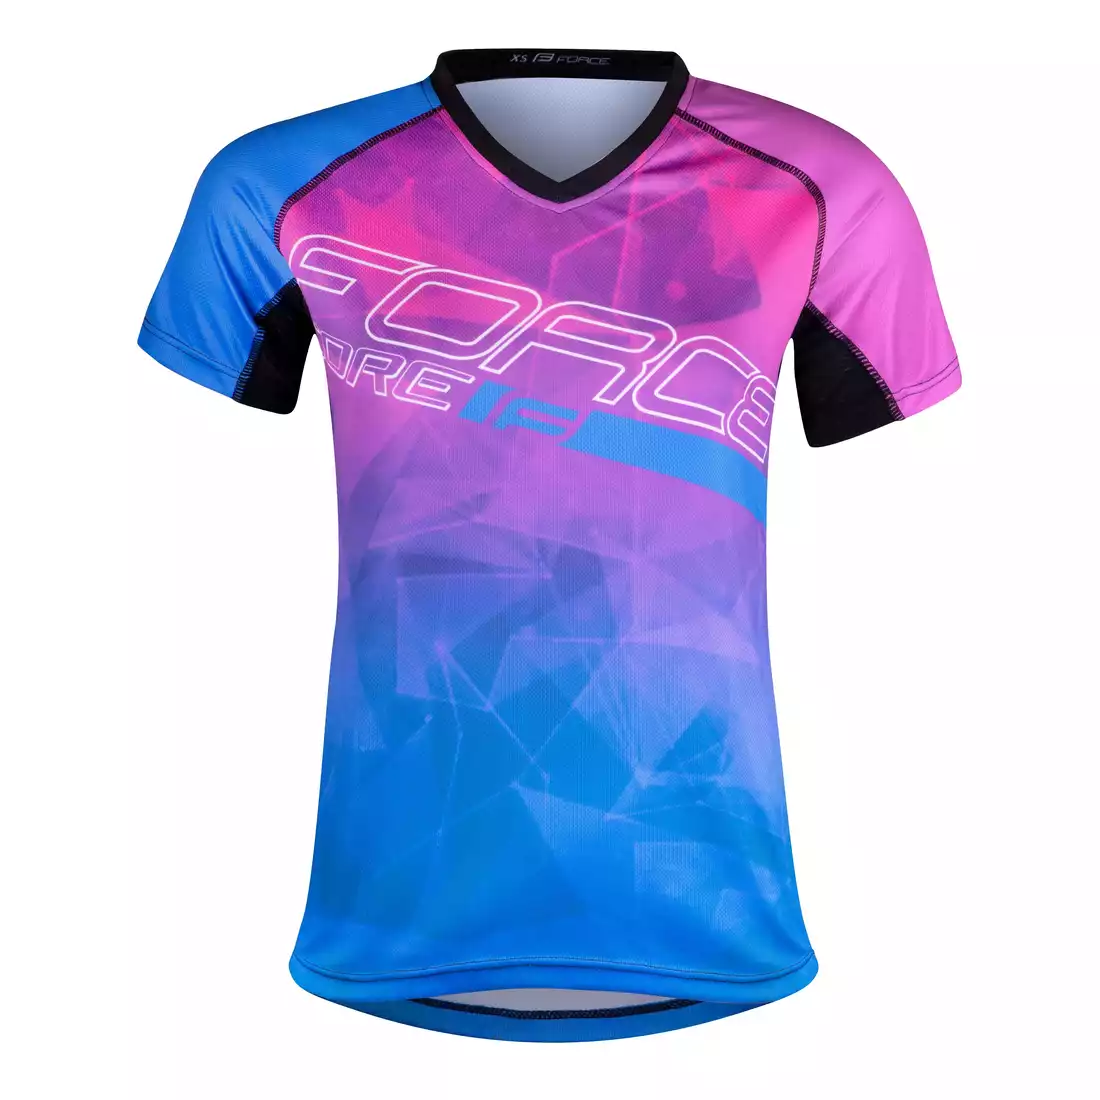 FORCE MTB CORE Women's cycling jersey, pink and blue